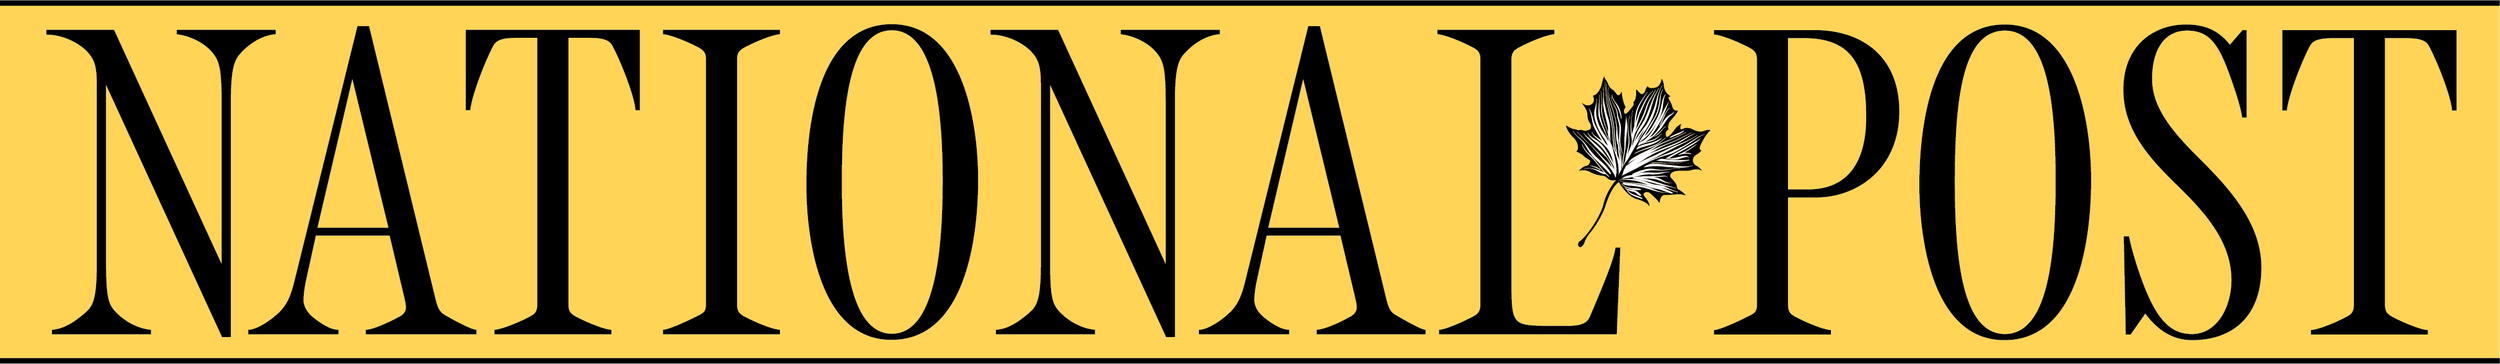 national-post-new-logo.png